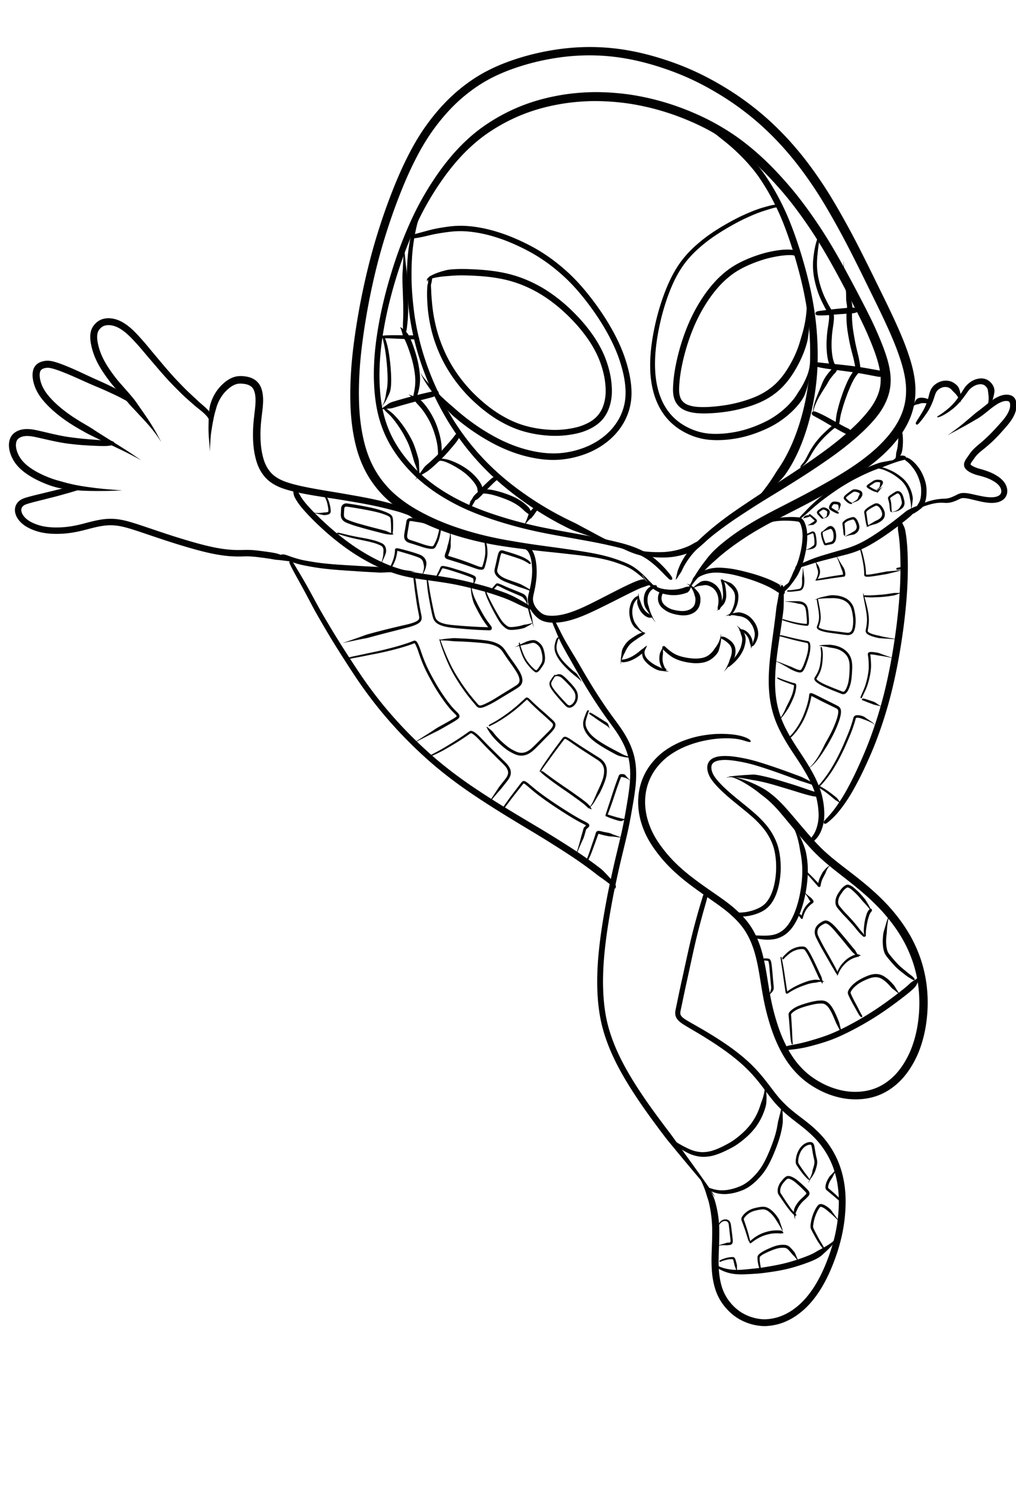 Ghost Spider 03  coloring pages to print and coloring